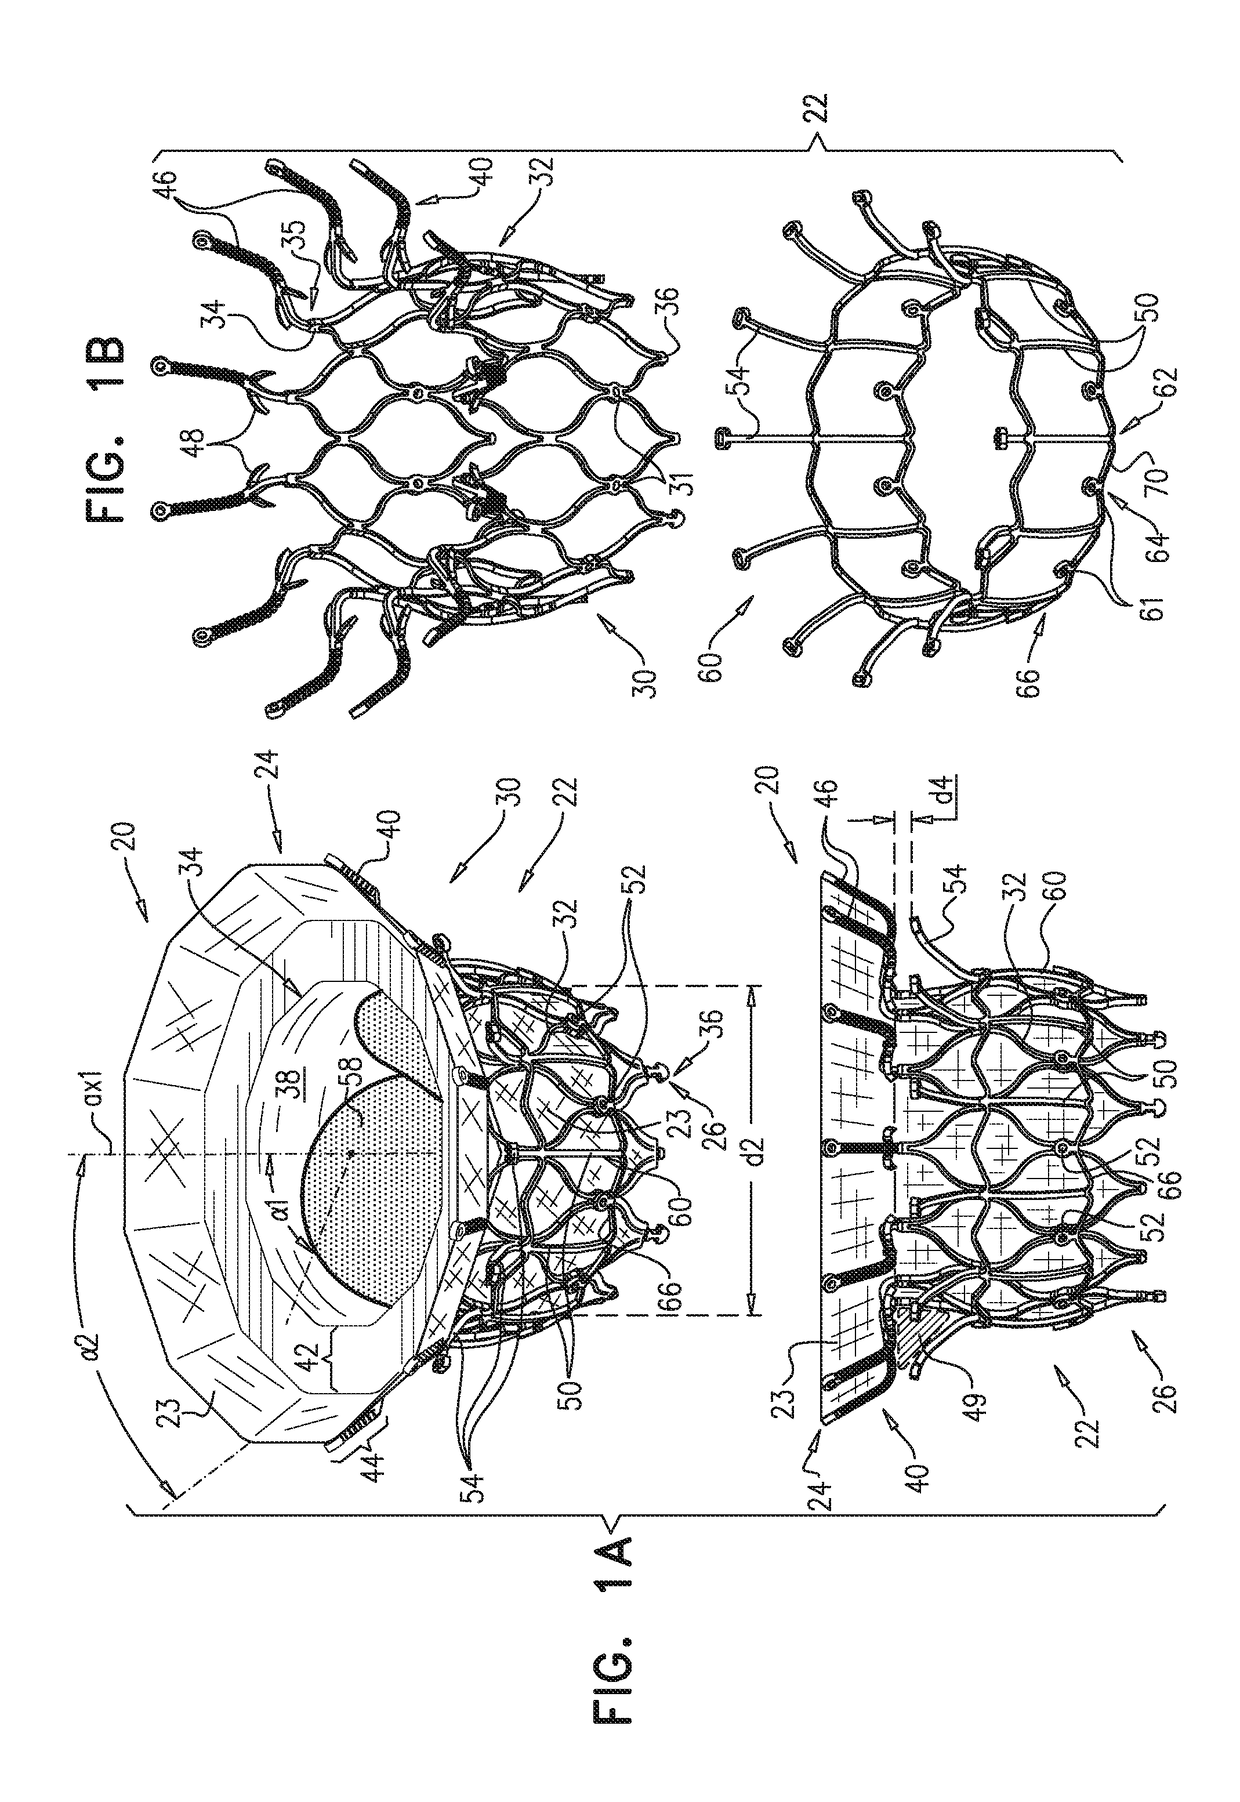 Prosthetic valve with axially-sliding frames